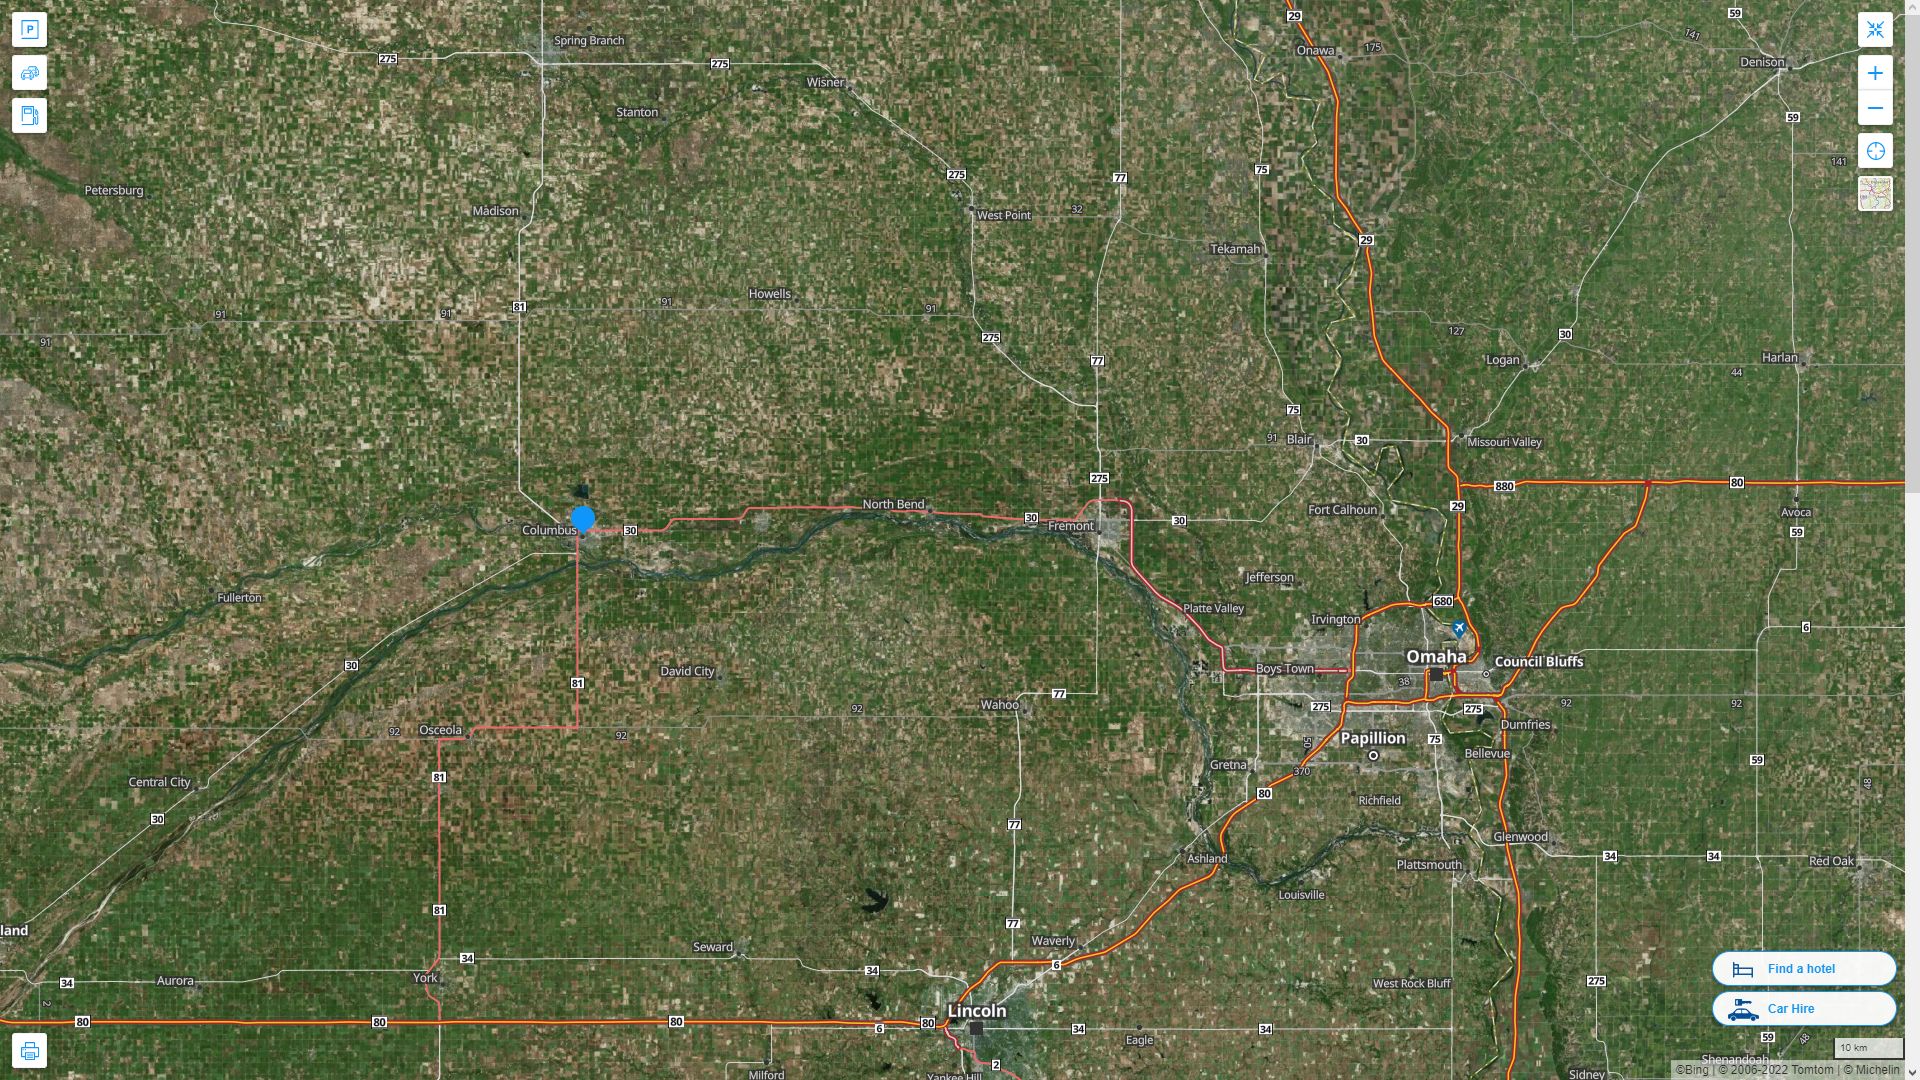 Columbus Nebraska Highway and Road Map with Satellite View